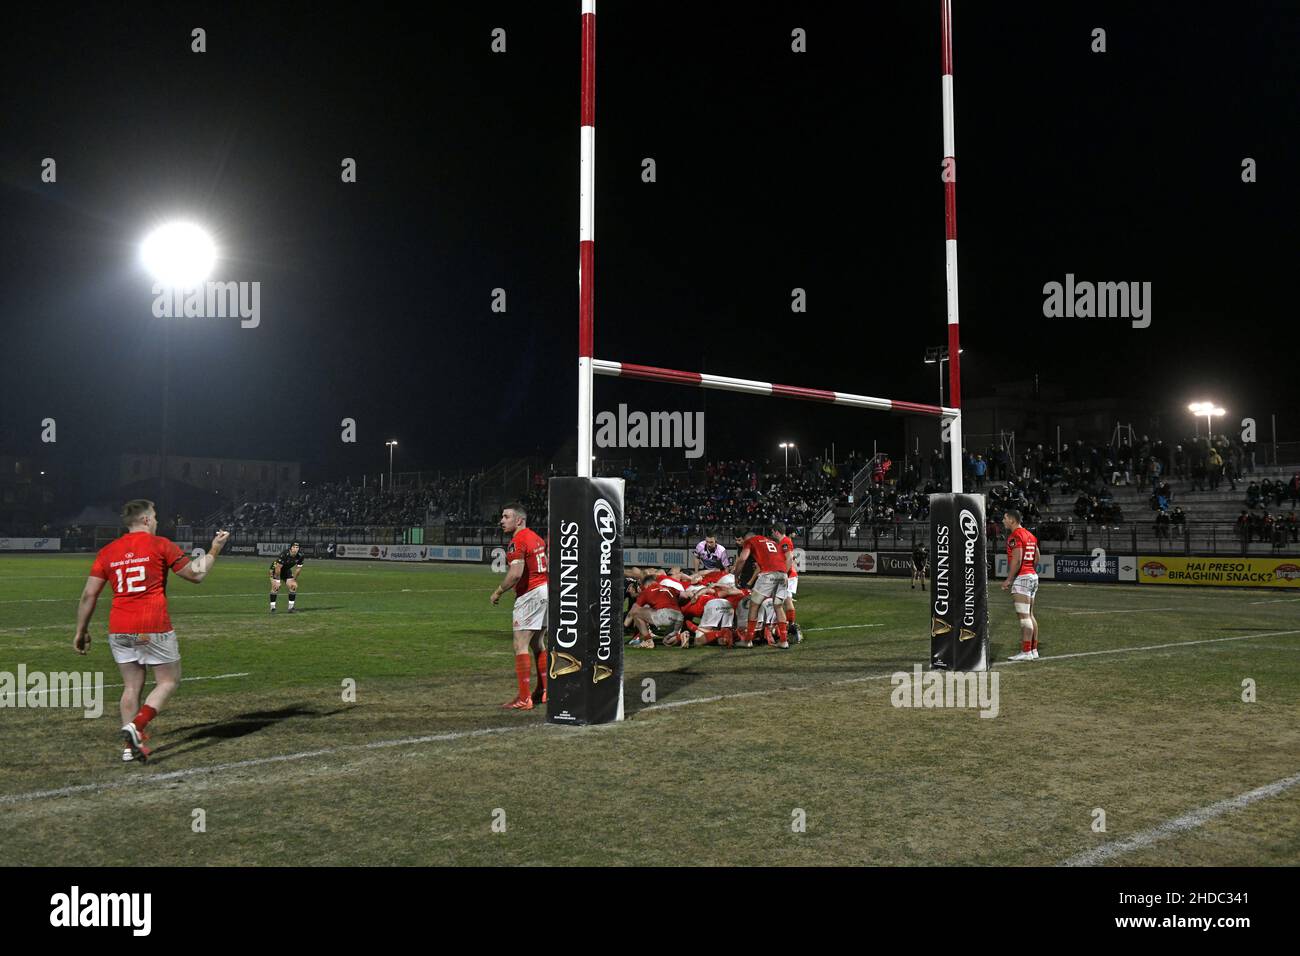 Rugby goalpost during a night Guinness Pro rugby match Zebre vs Munster Stock Photo